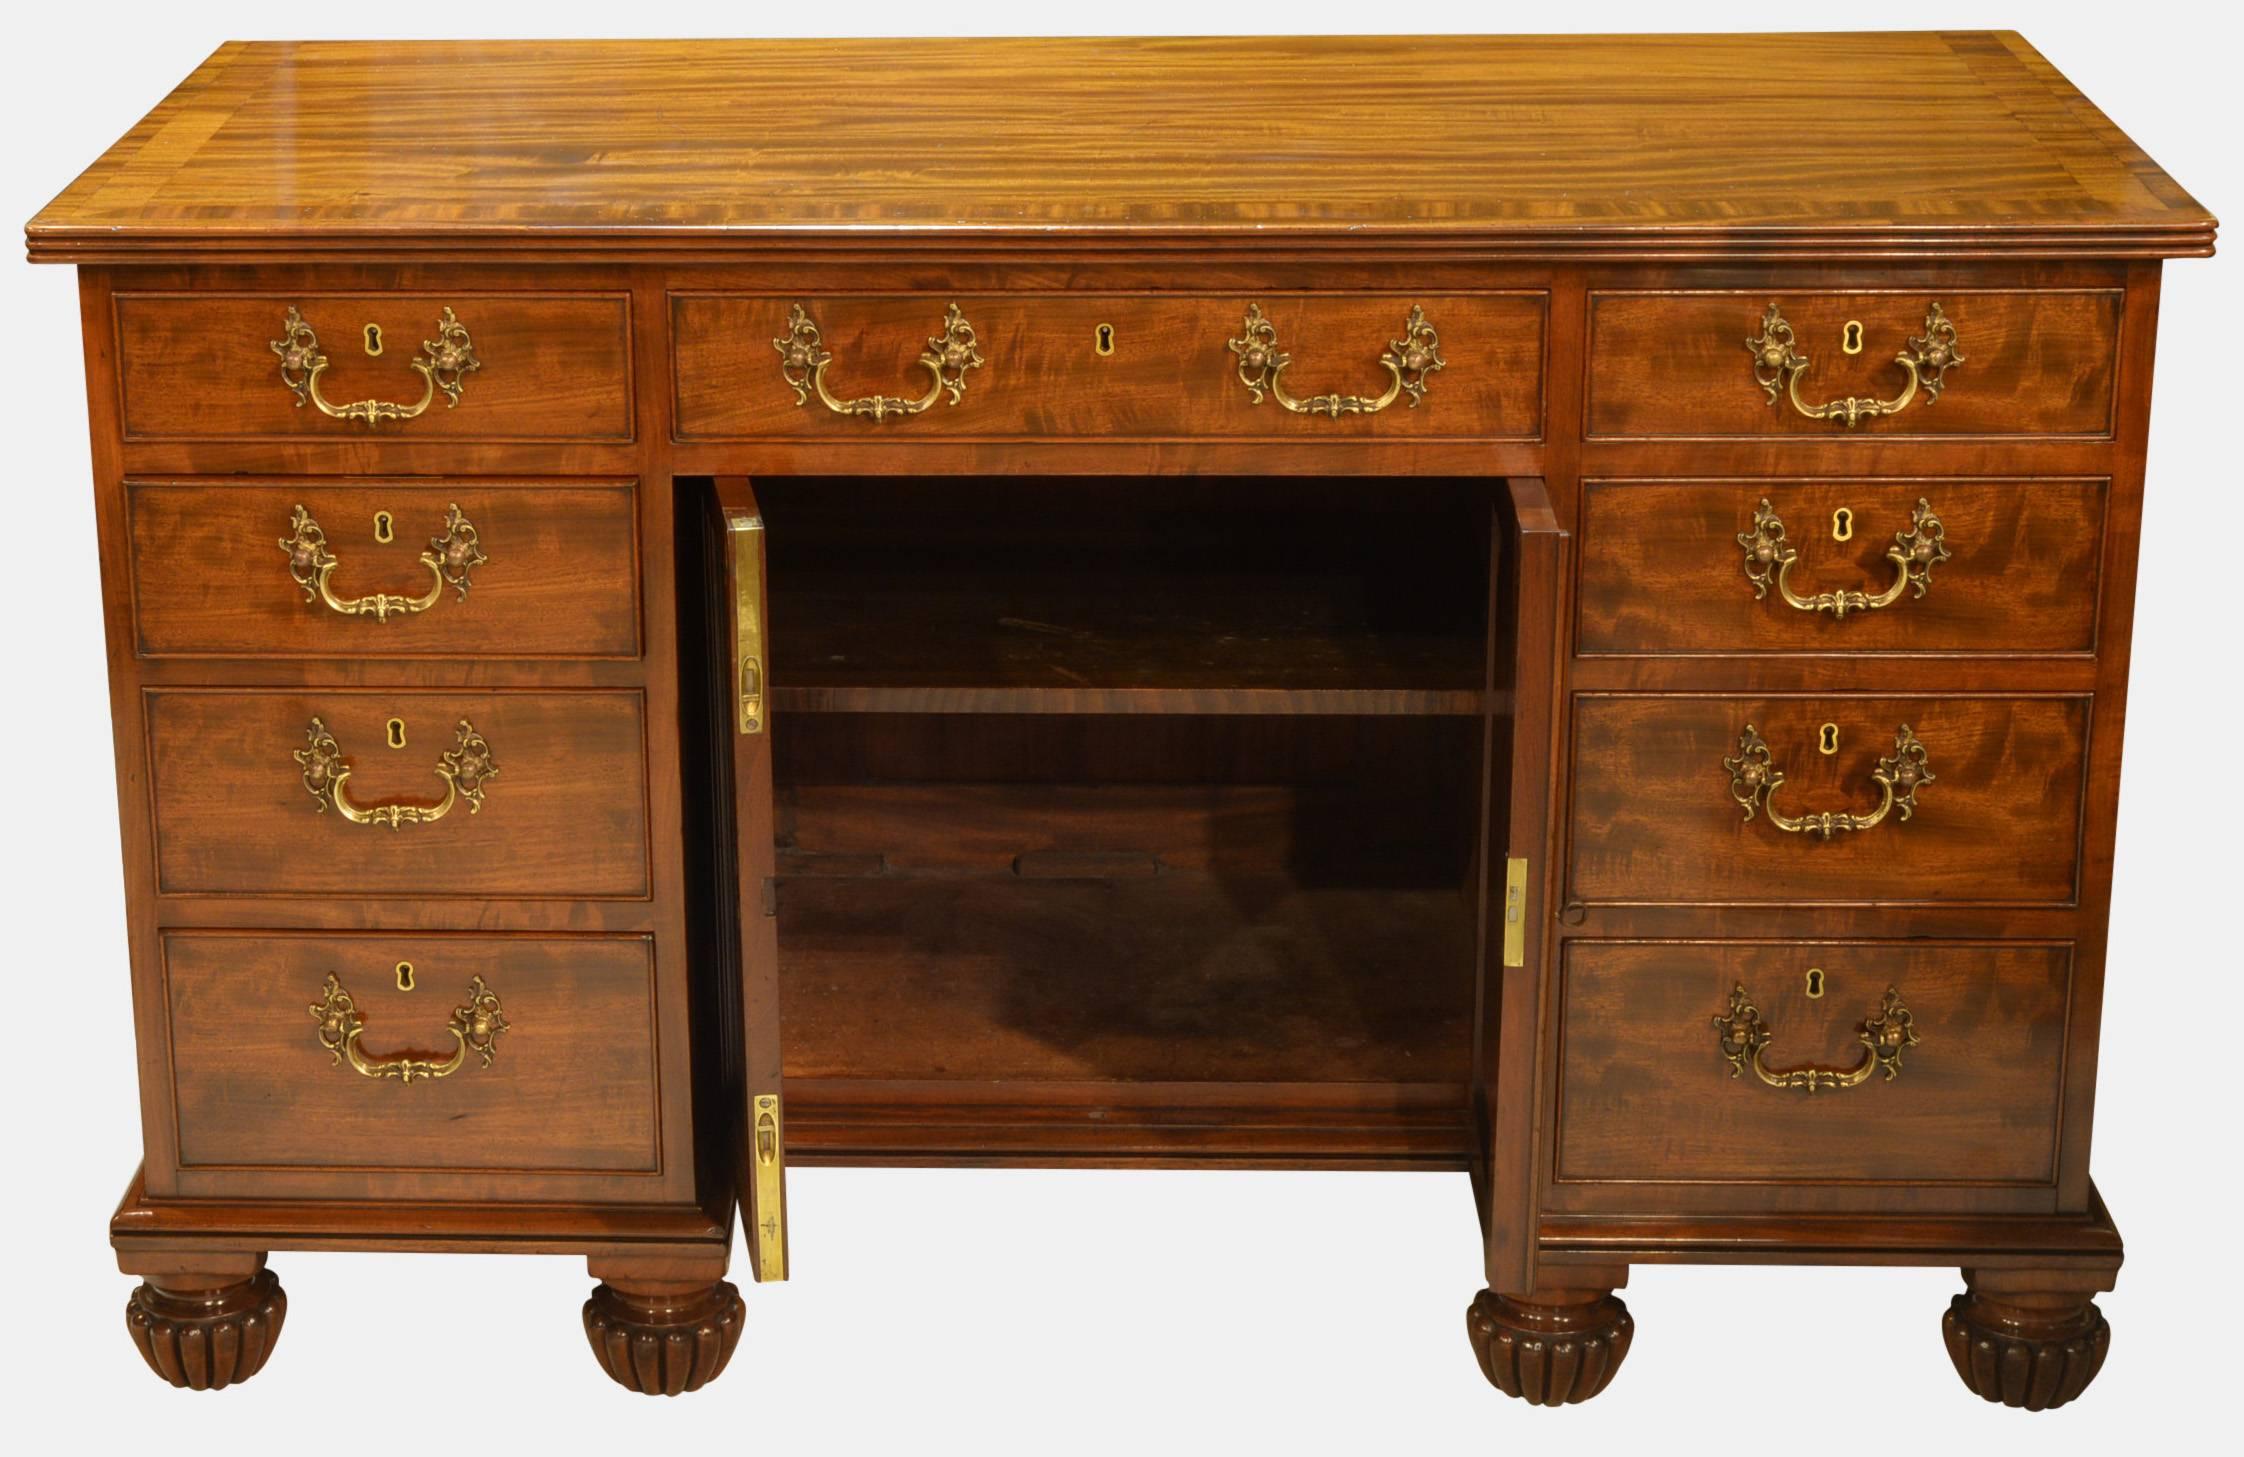 George III knee hole mahogany crossbanded top desk in the manner of Gillows,

circa 1820.

74 cm (29.1